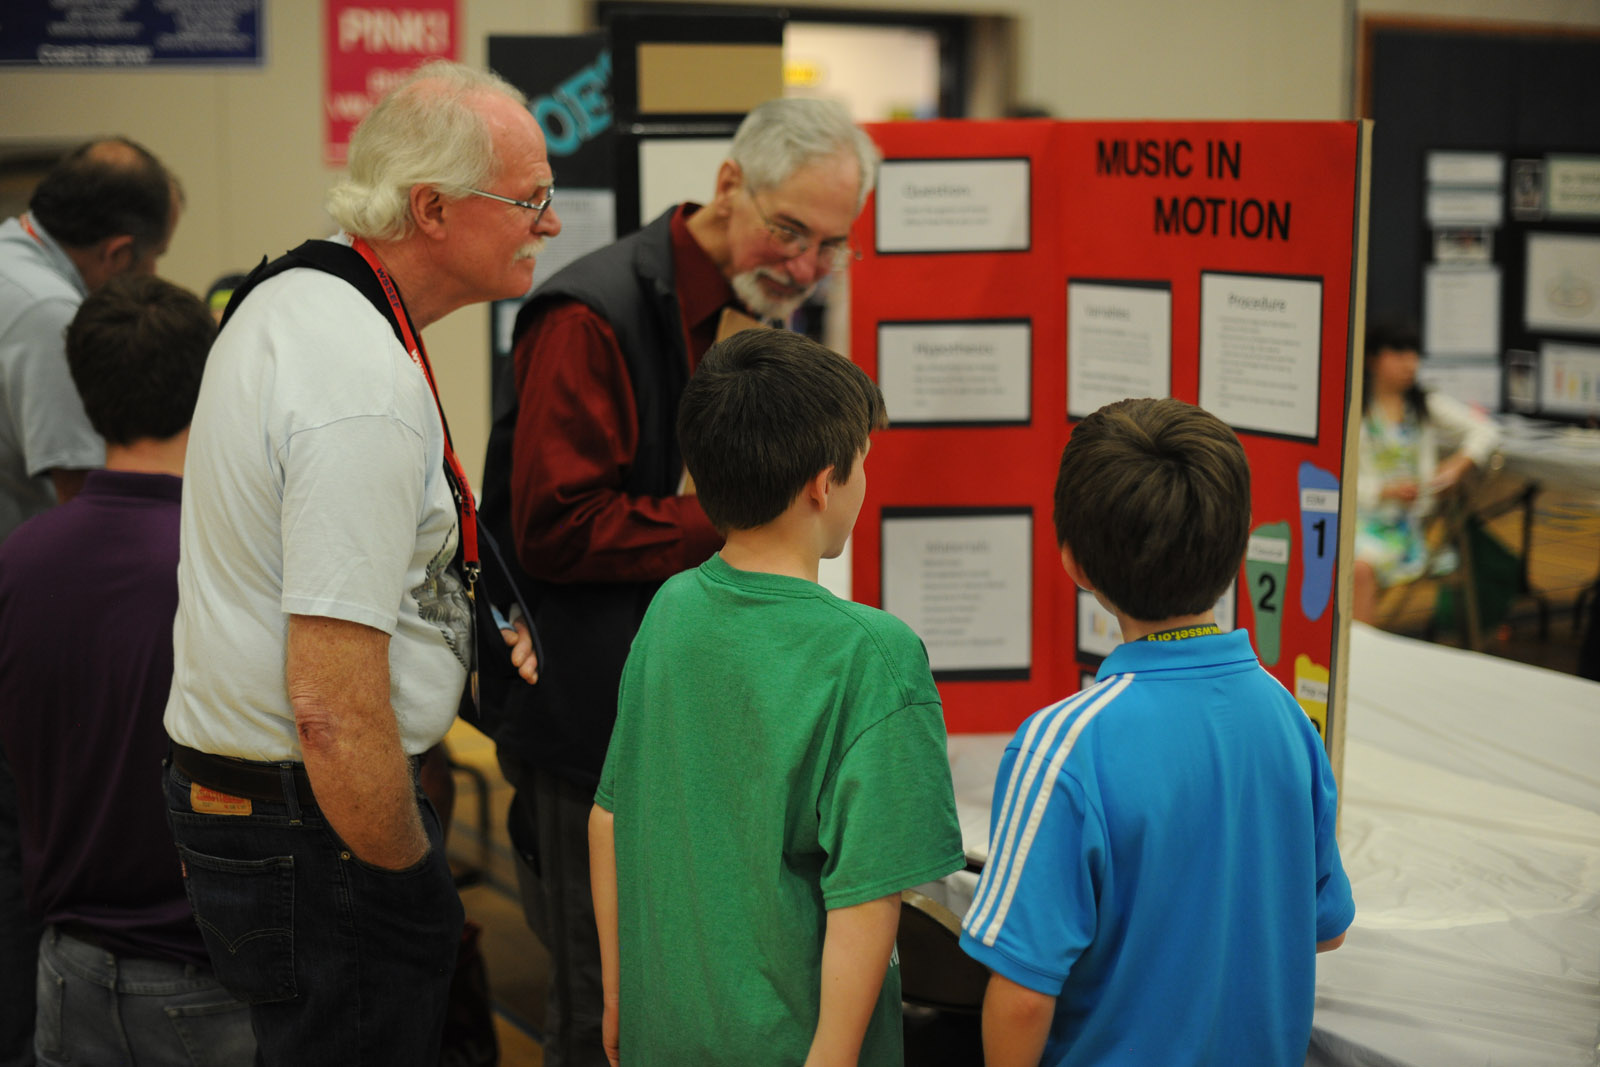 Science Fair 2016-04-01 by Mike Bay D3X 195